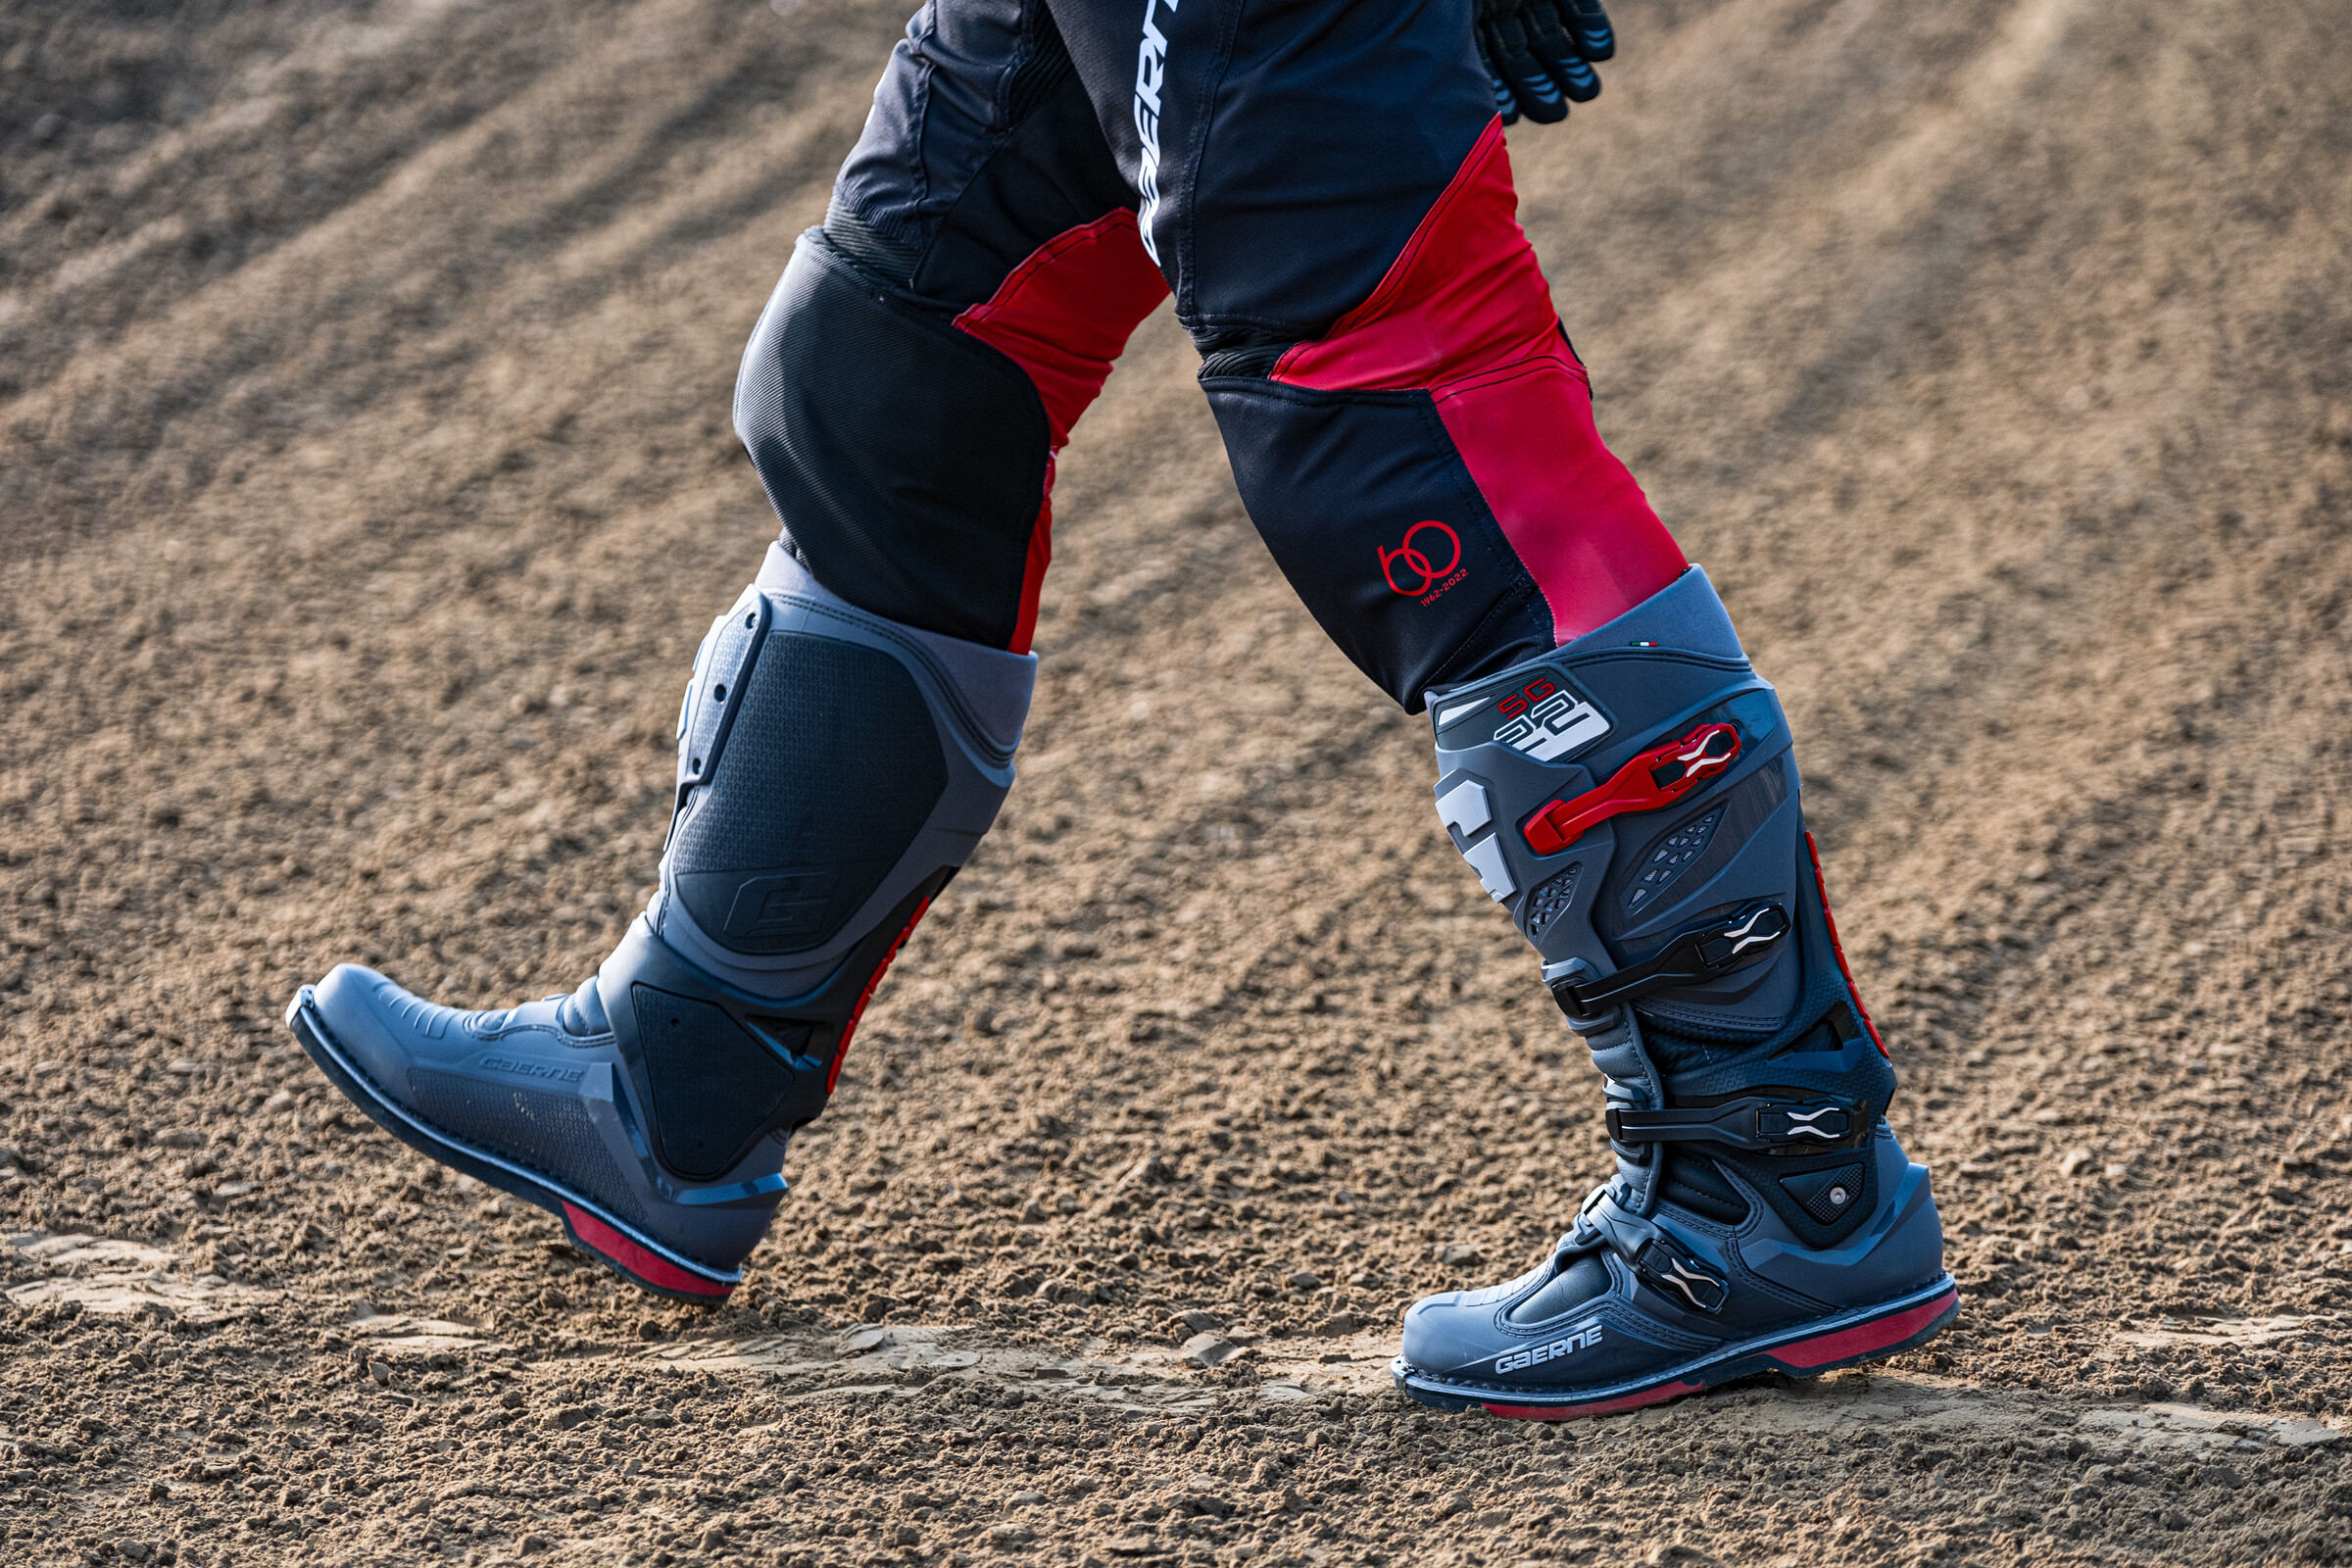 Gaerne Releases New SG22 Off-Road Boot - Racer X